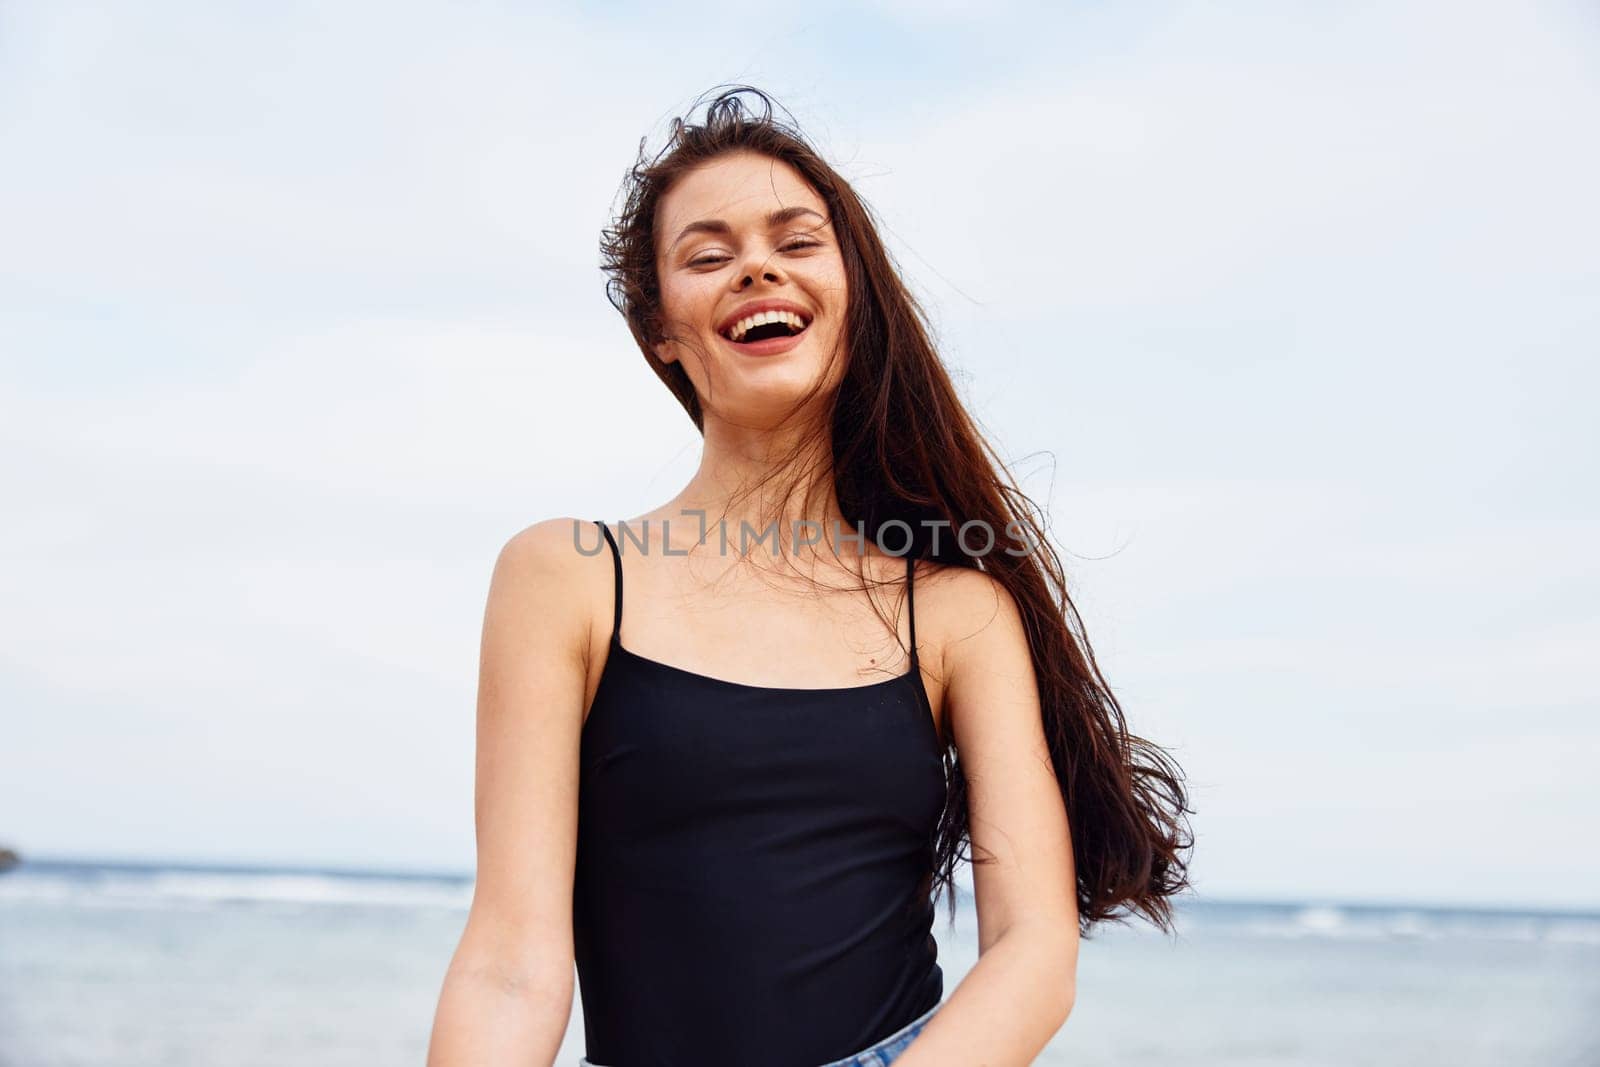 woman beach travel dress enjoyment young holiday smile running ocean sunset vacation smiling nature adult sand happy happiness sea summer coast